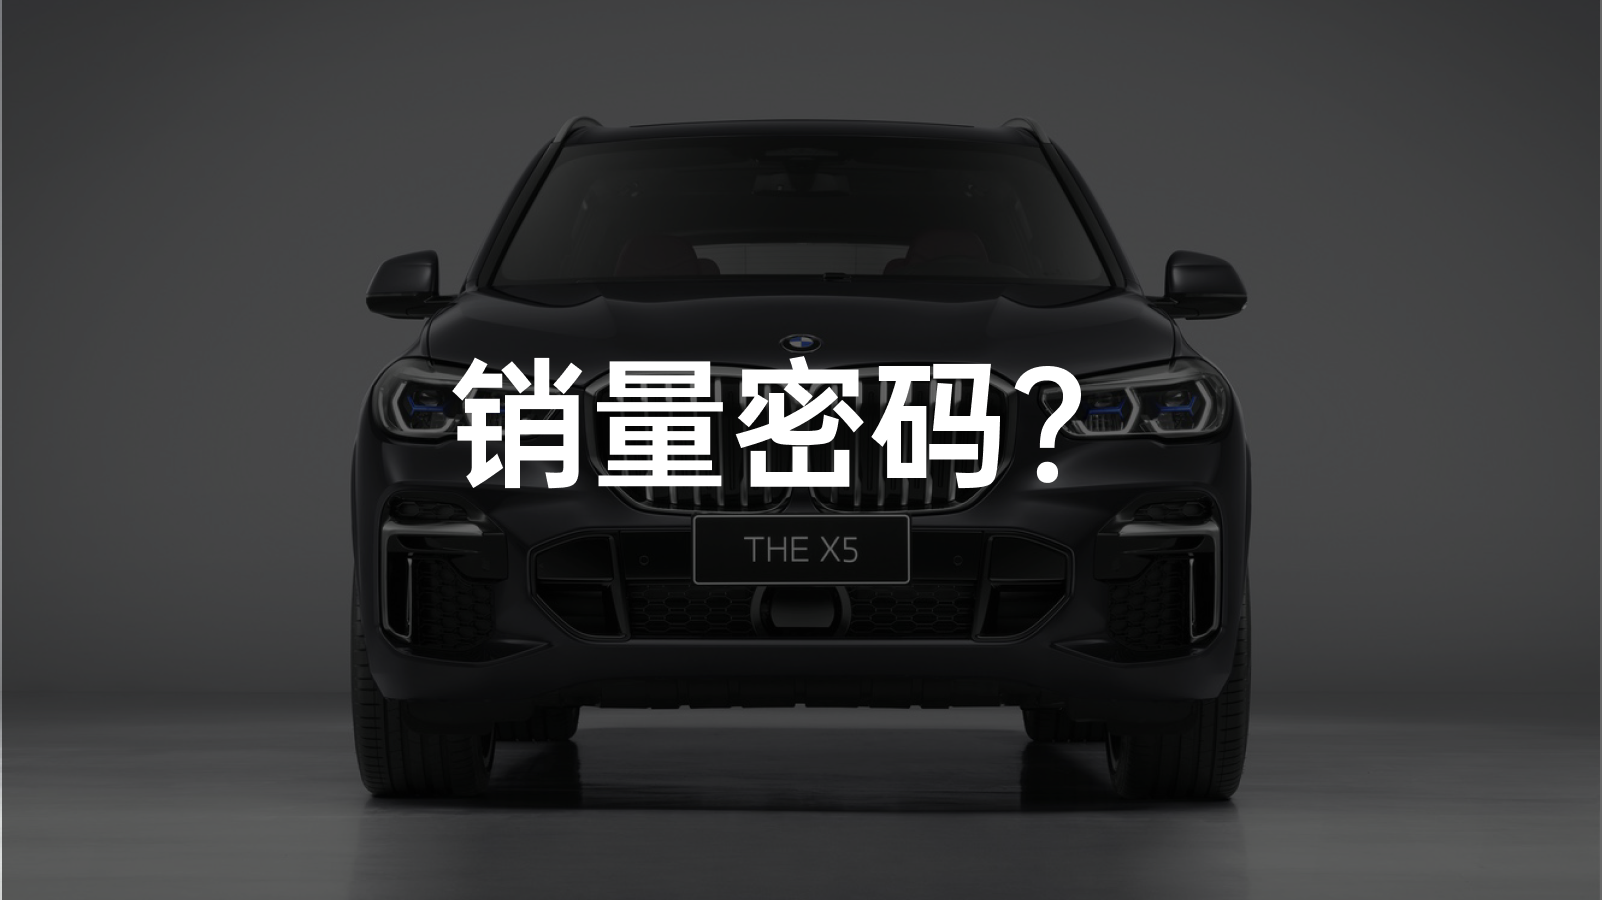 Starting price of RMB 605,000 / RMB 34,990: Will domestically-produced long-wheelbase X5 and i3 be the sales key for BMW?